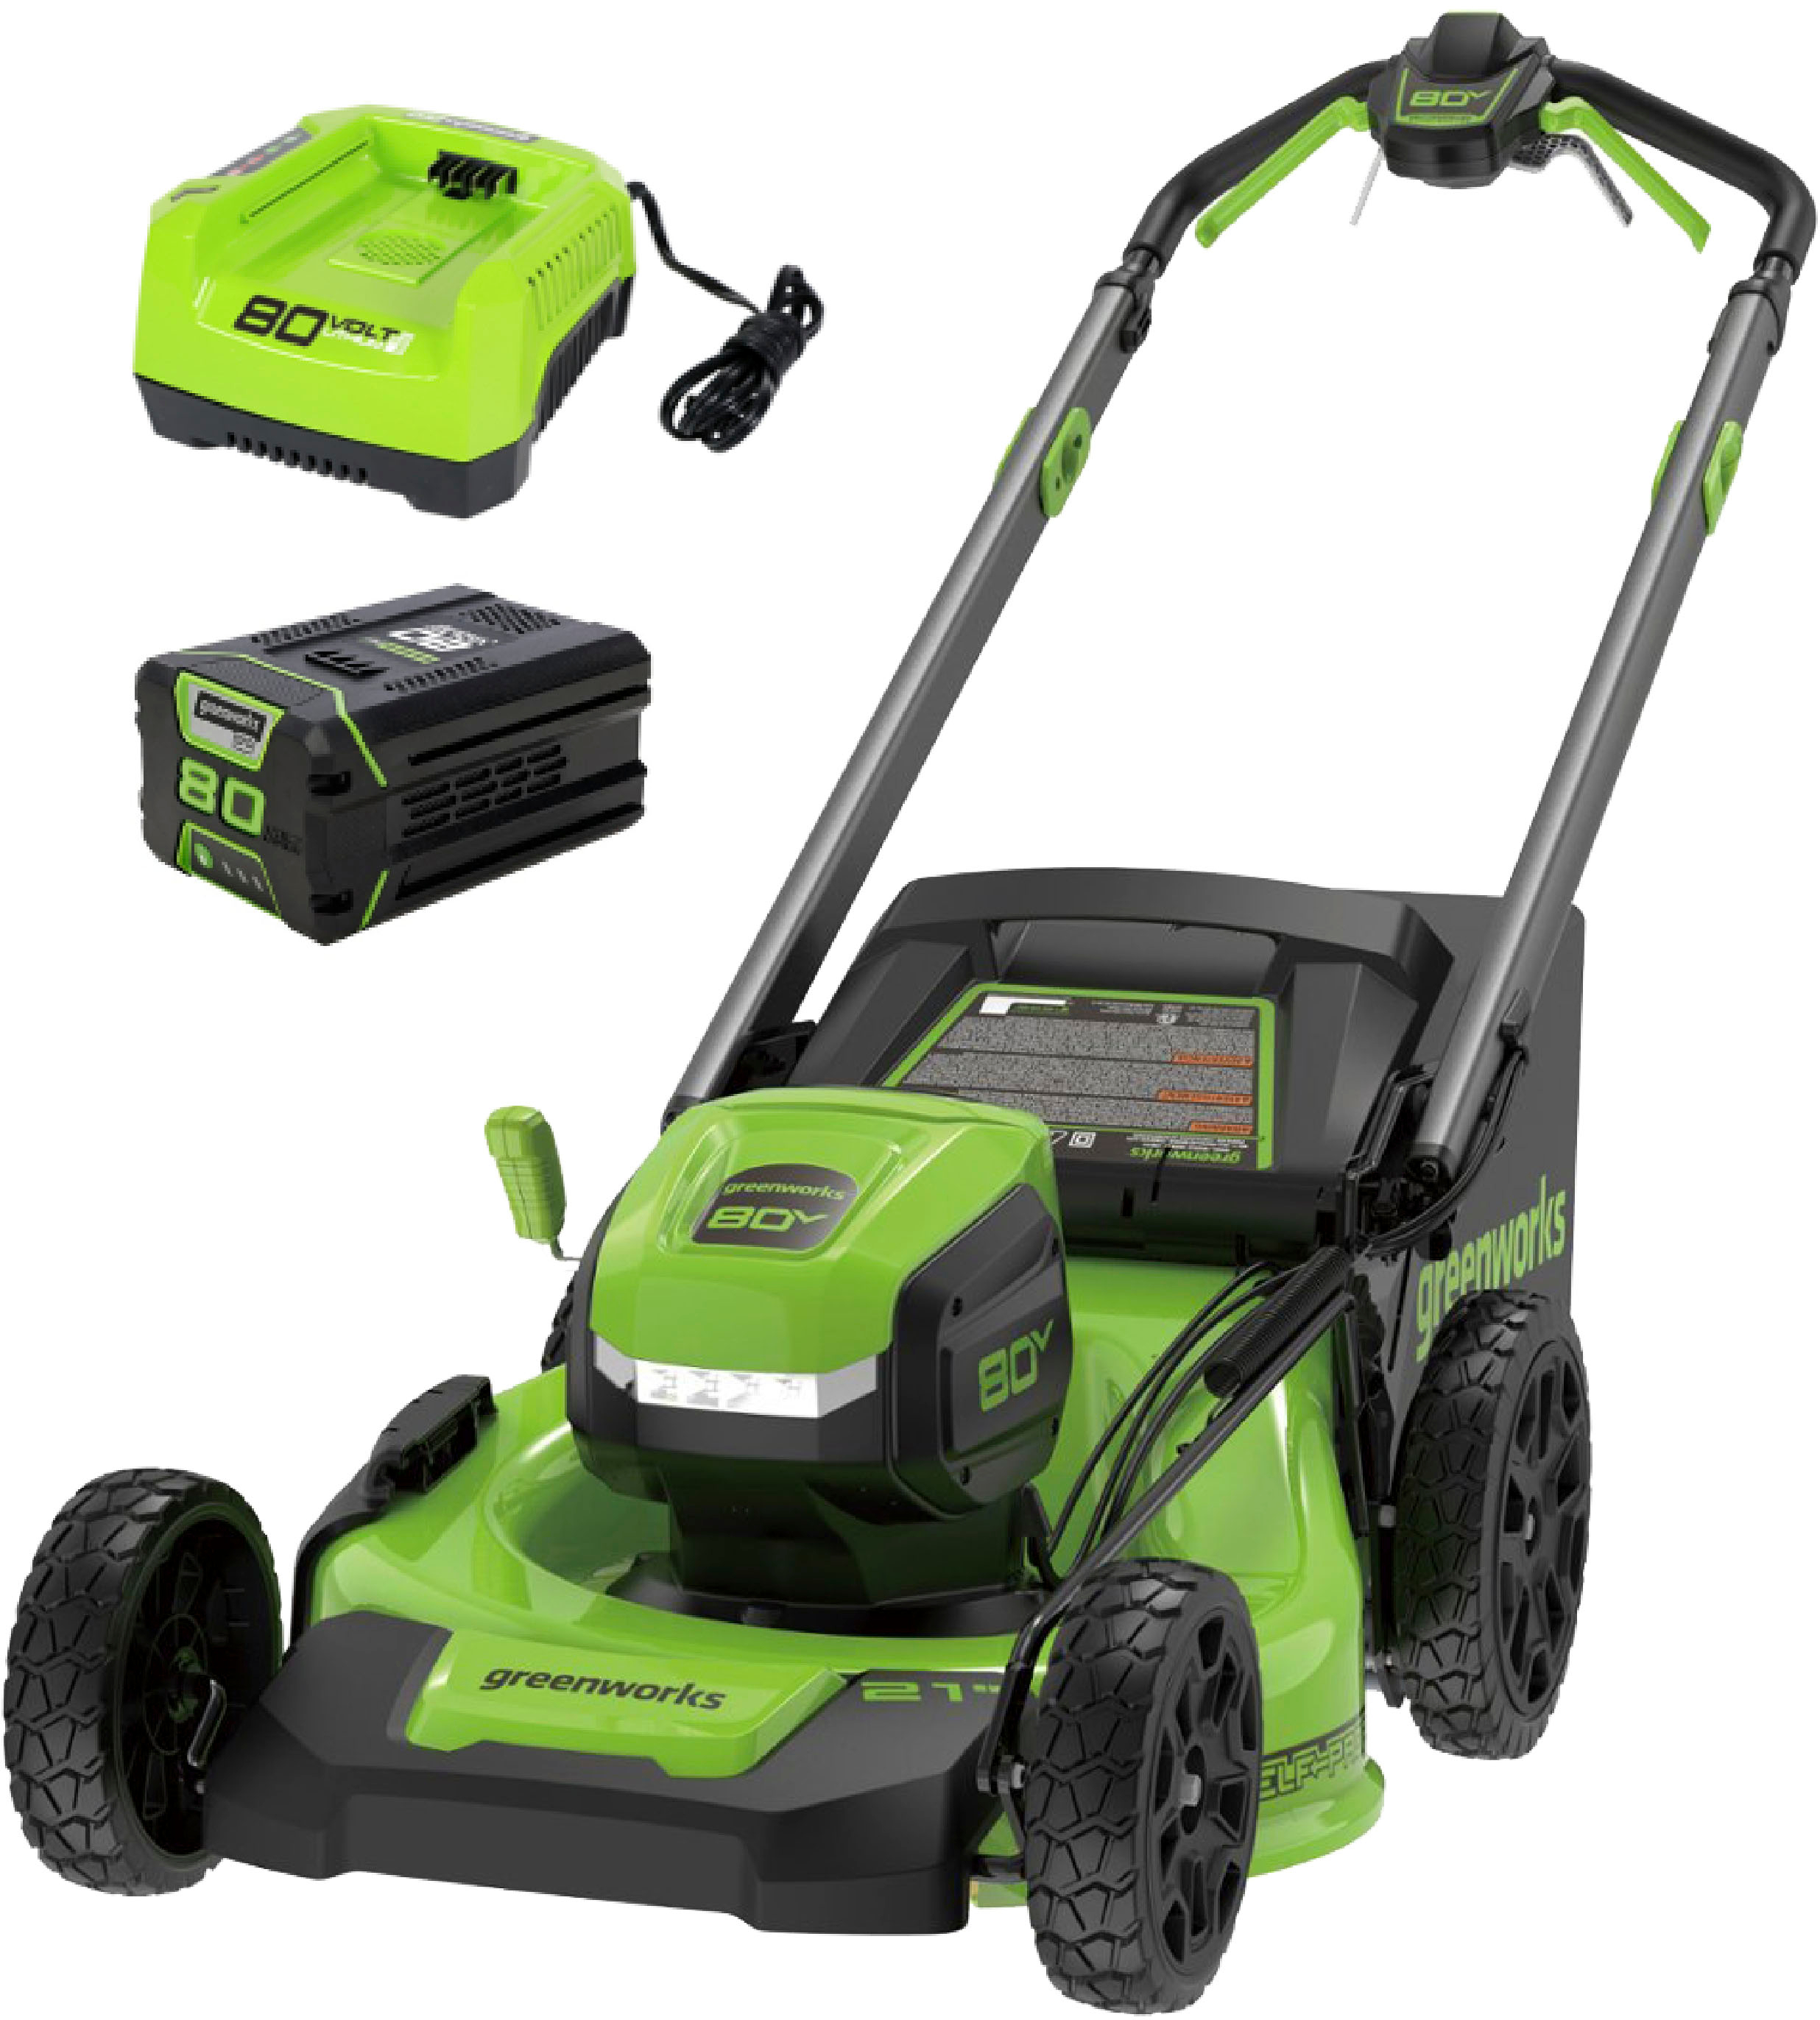 Greenworks 80 Volt 21-Inch Self-Propelled Lawn Mower (1 x 4.0Ah Battery and  1 x Charger) Green 2544802/MO80L413 - Best Buy